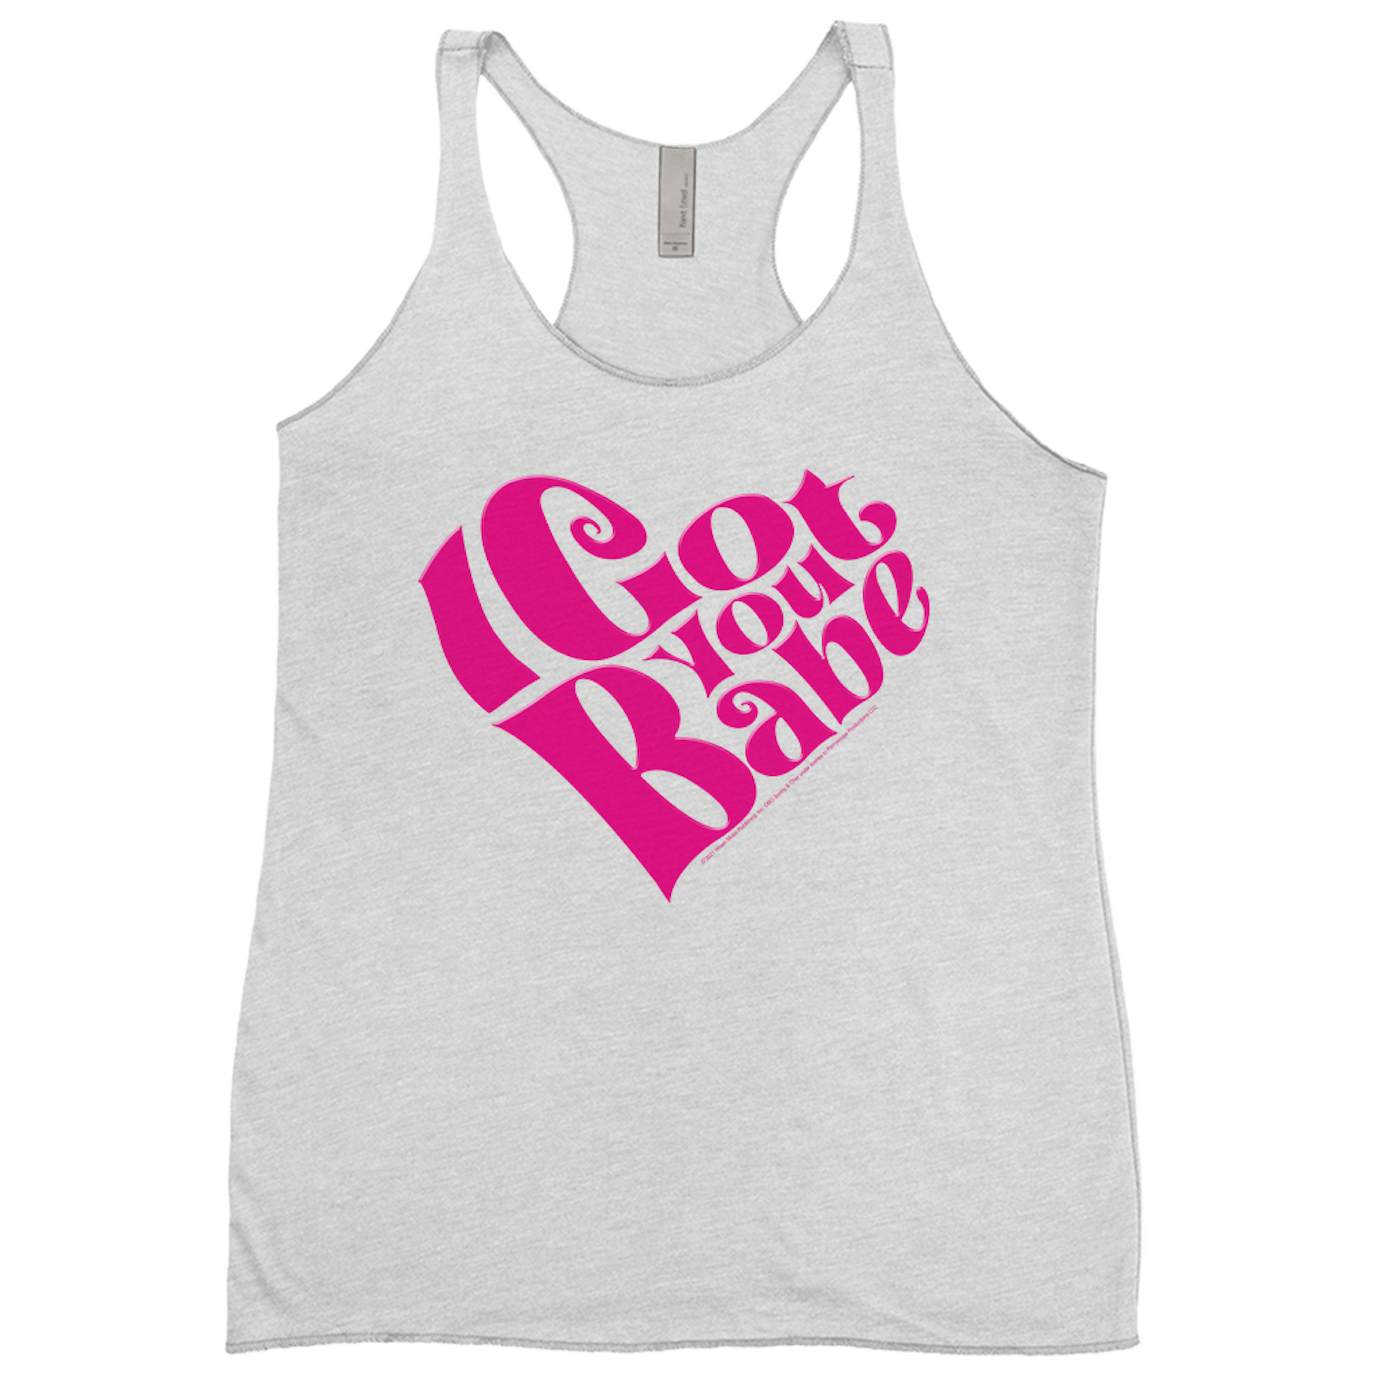 Sonny & Cher Ladies' Tank Top | I Got You Babe Heart Image Sonny and Cher Shirt